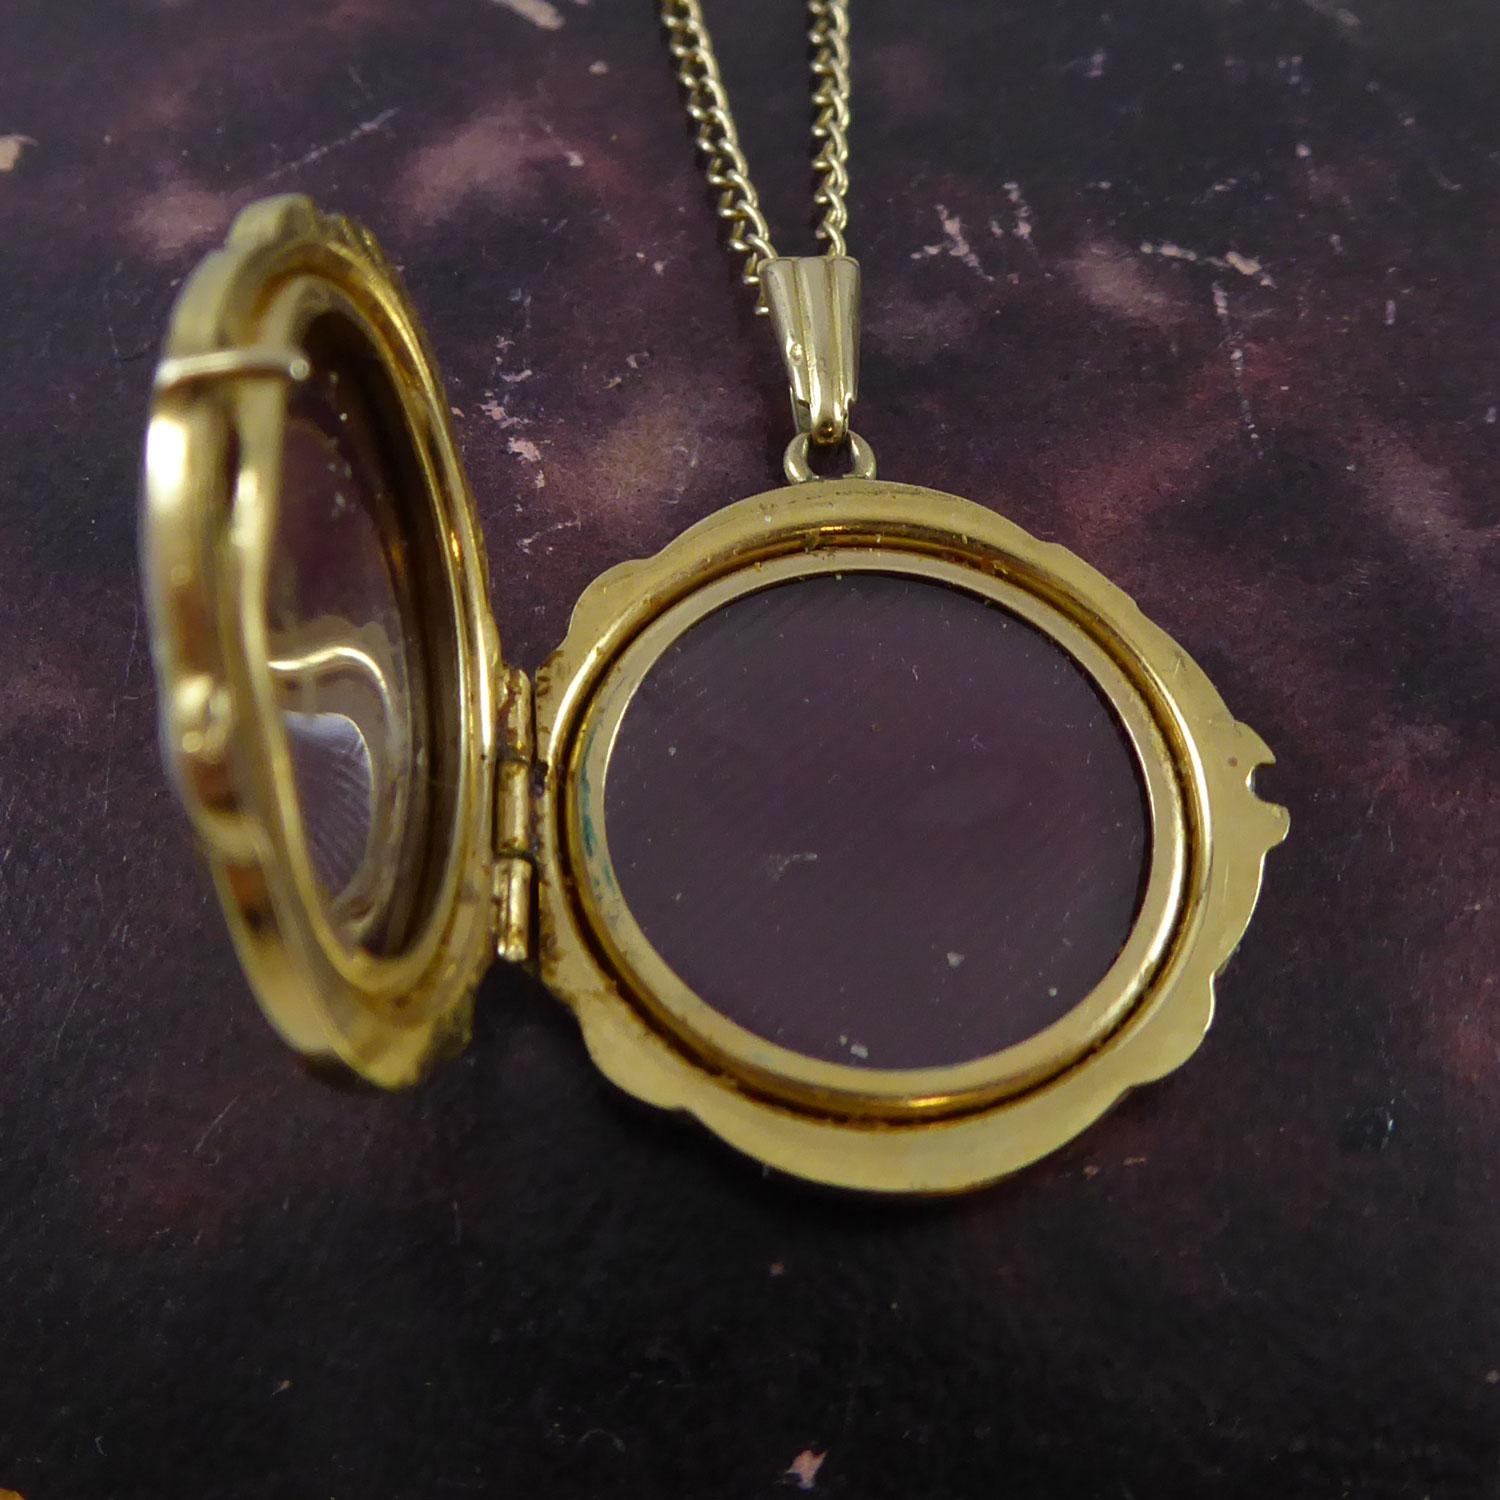 Vintage Round Gold Locket with Floral Engraving, Yellow Gold 3